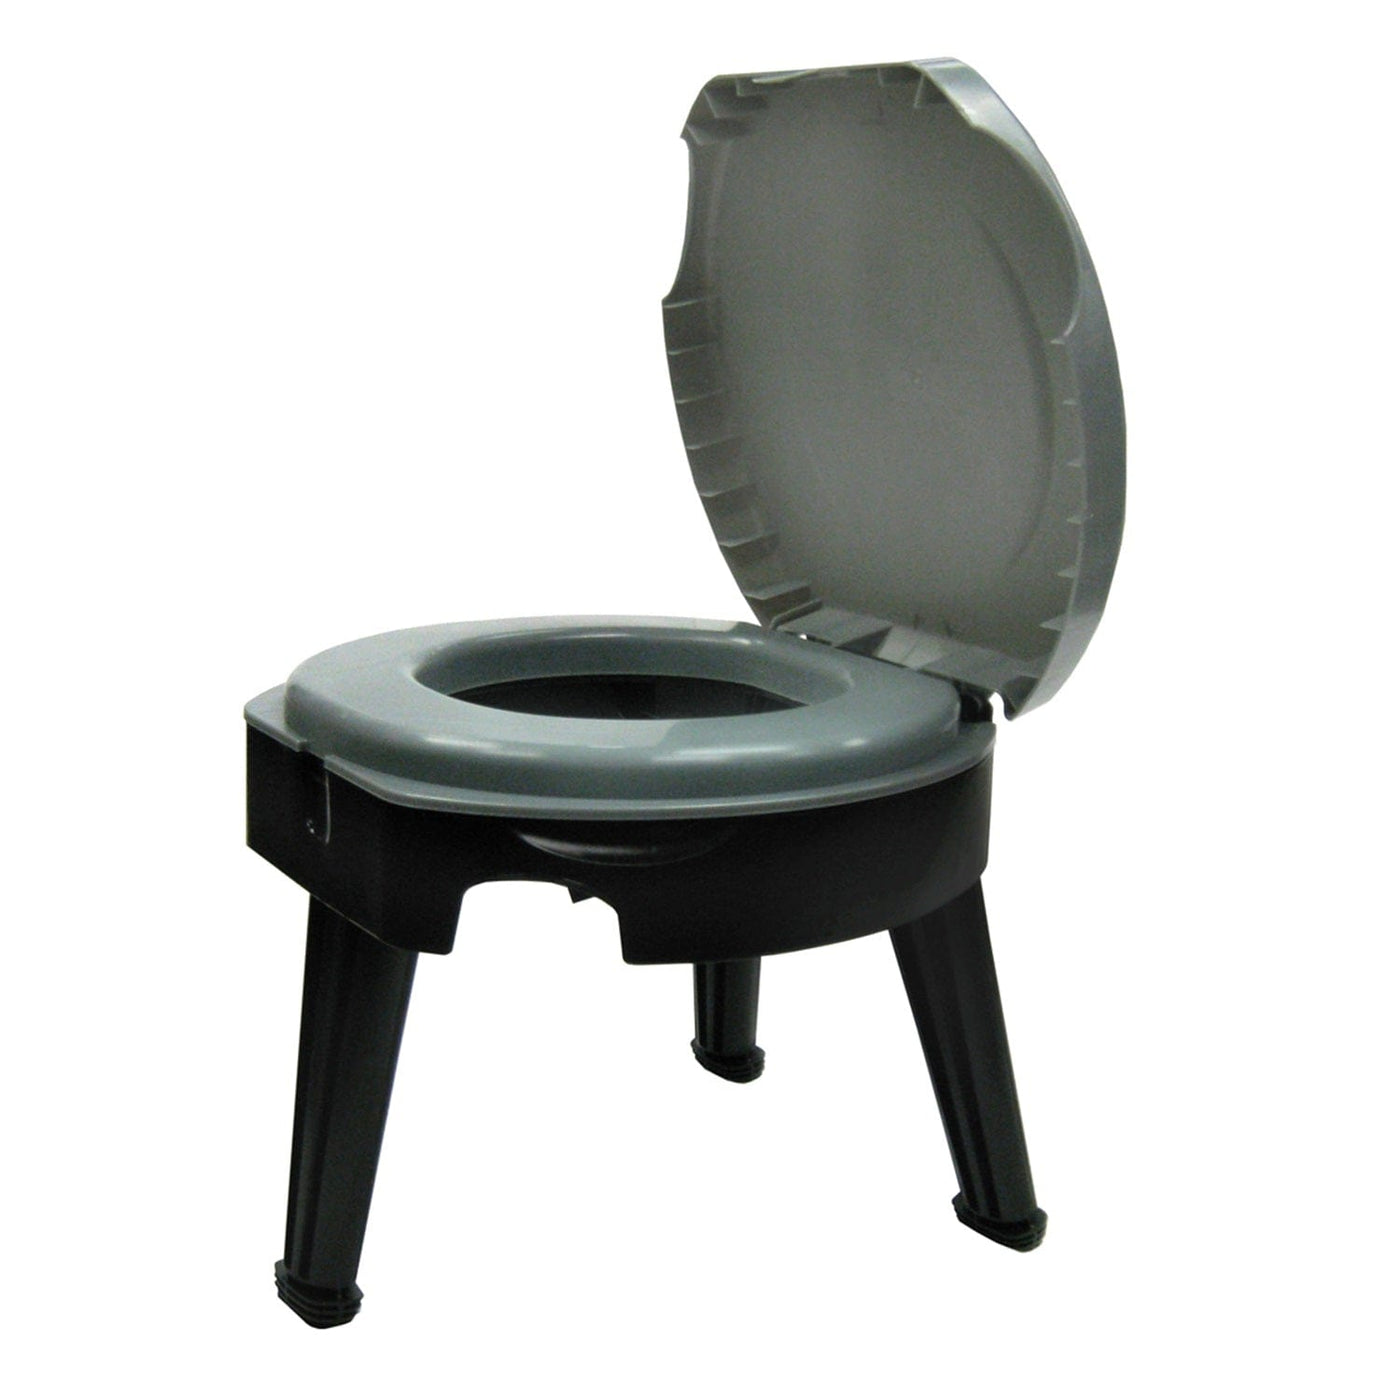 Reliance Reliance Fold-To-Go Collapsible Portable Toilet Camping And Outdoor